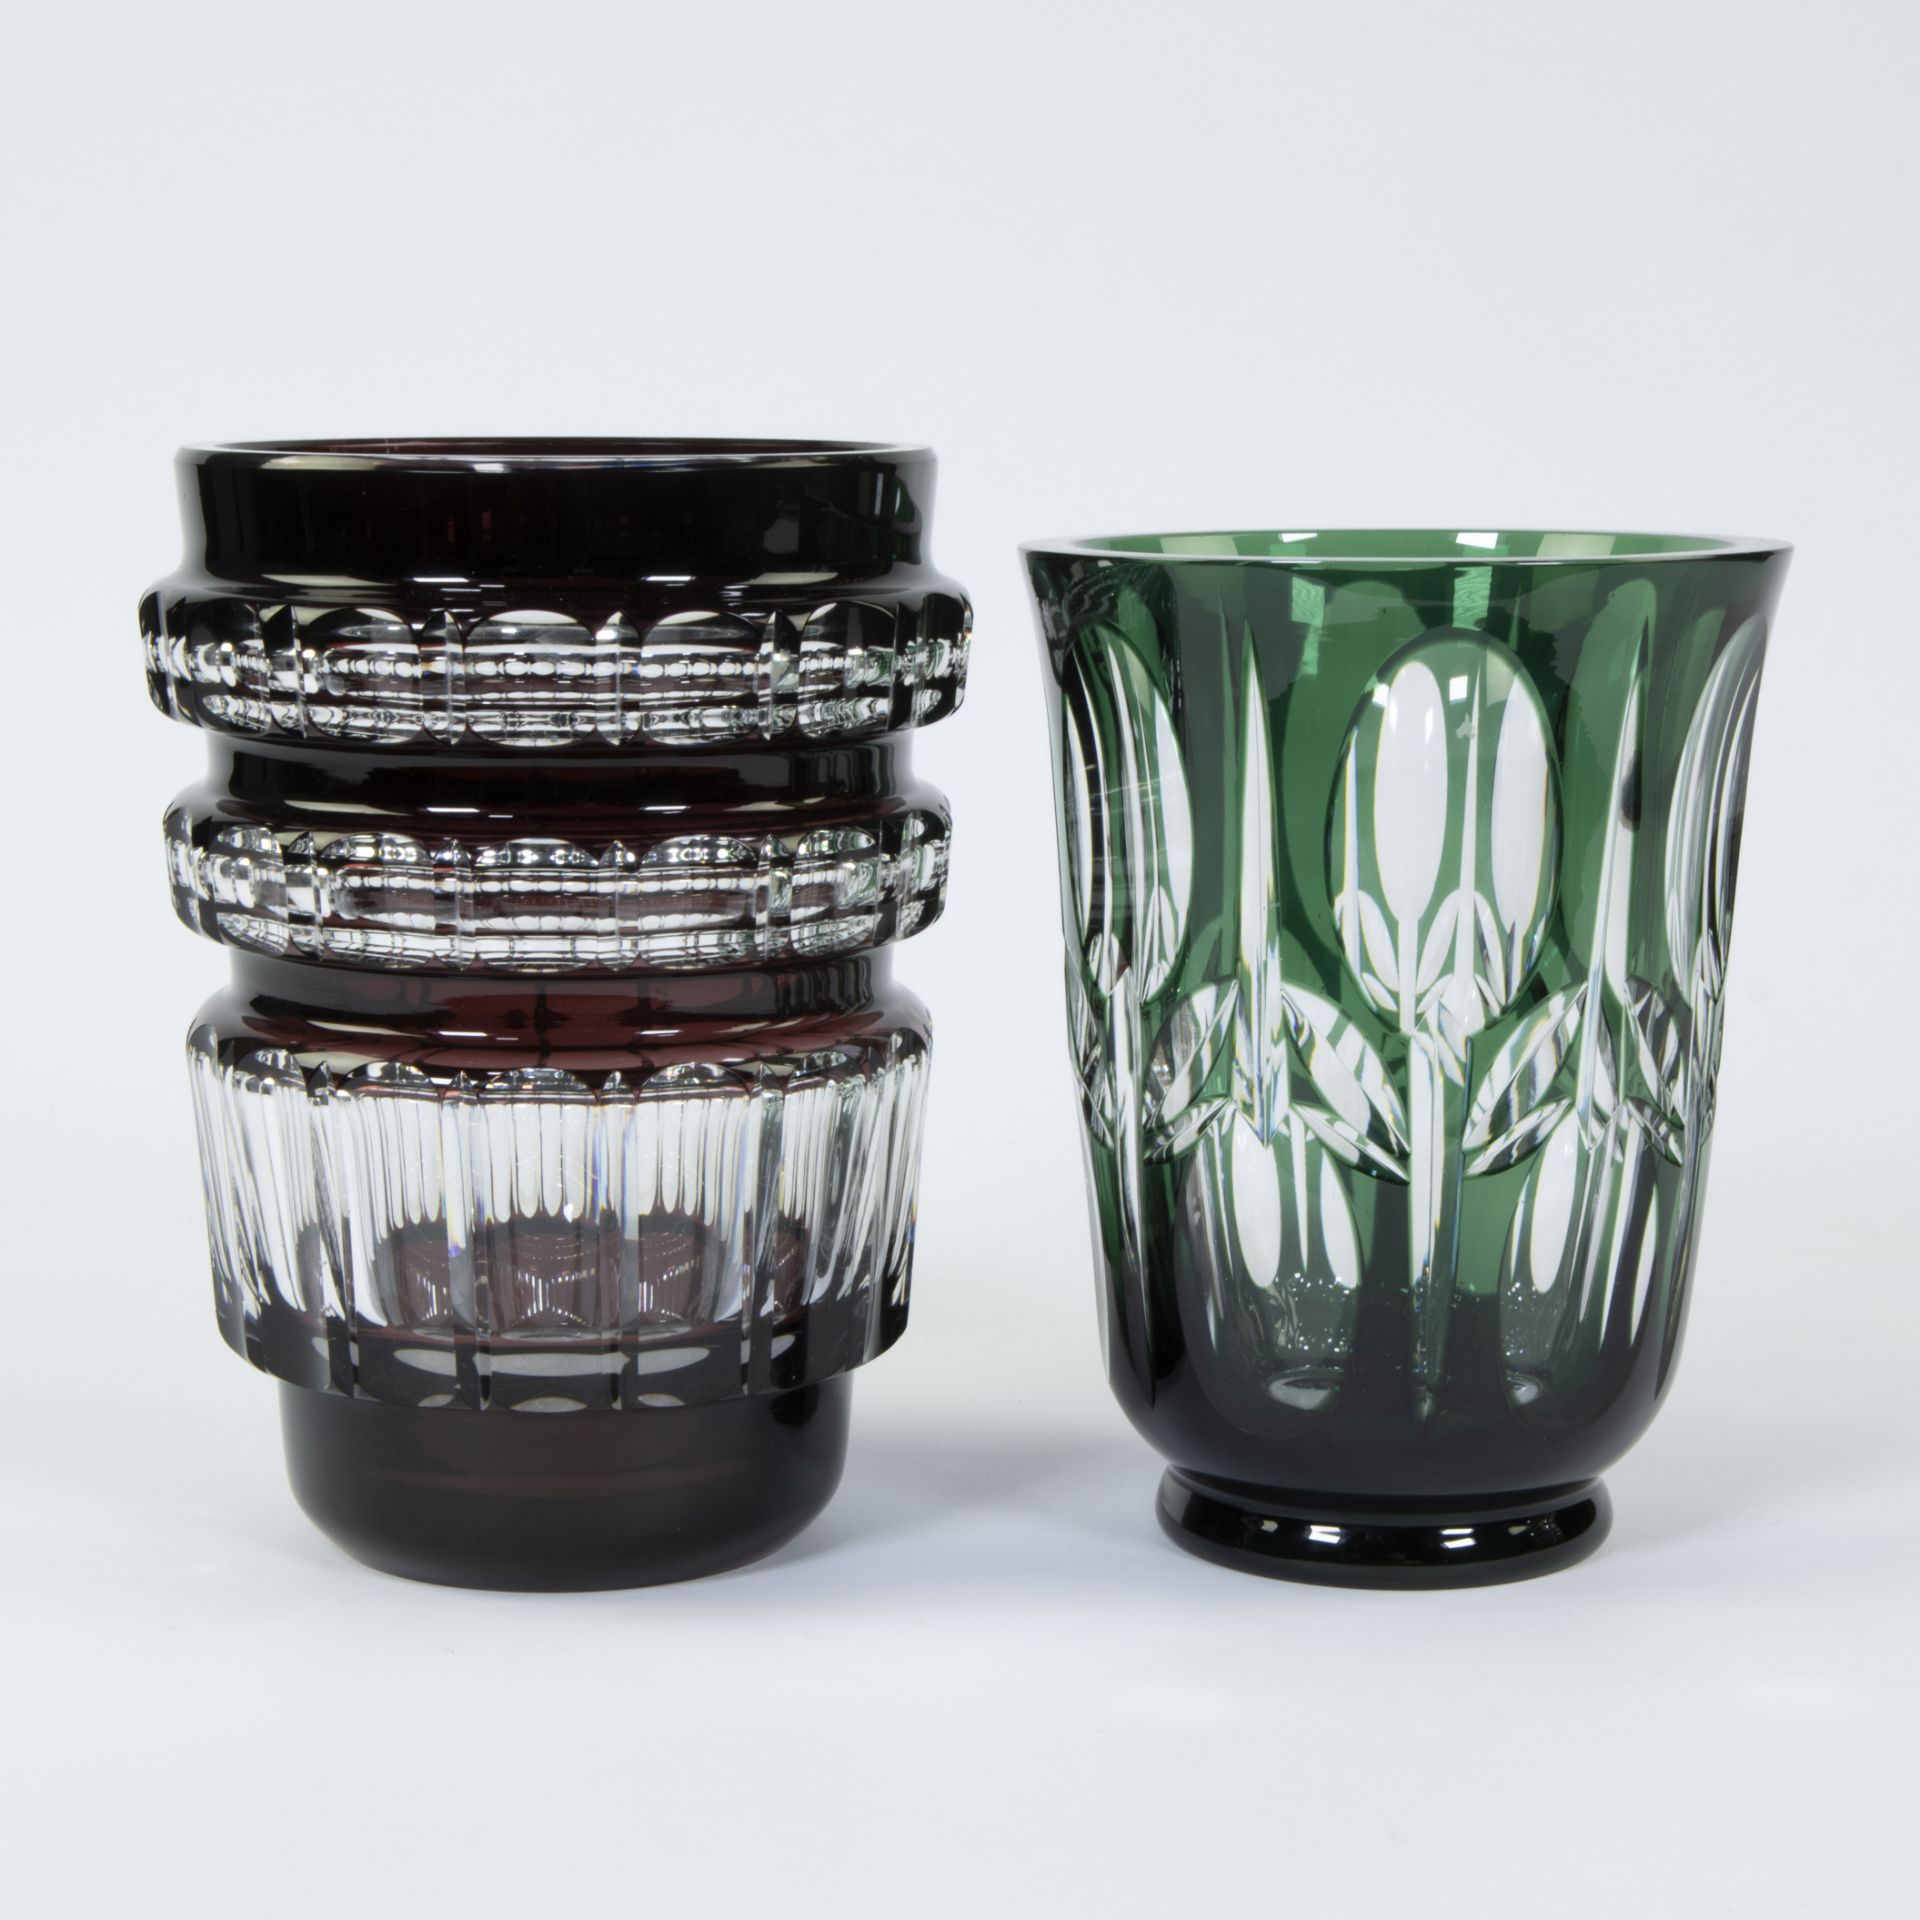 Val Saint Lambert brown and clear cut crystal vase by Joseph Simon and green and clear cut crystal A